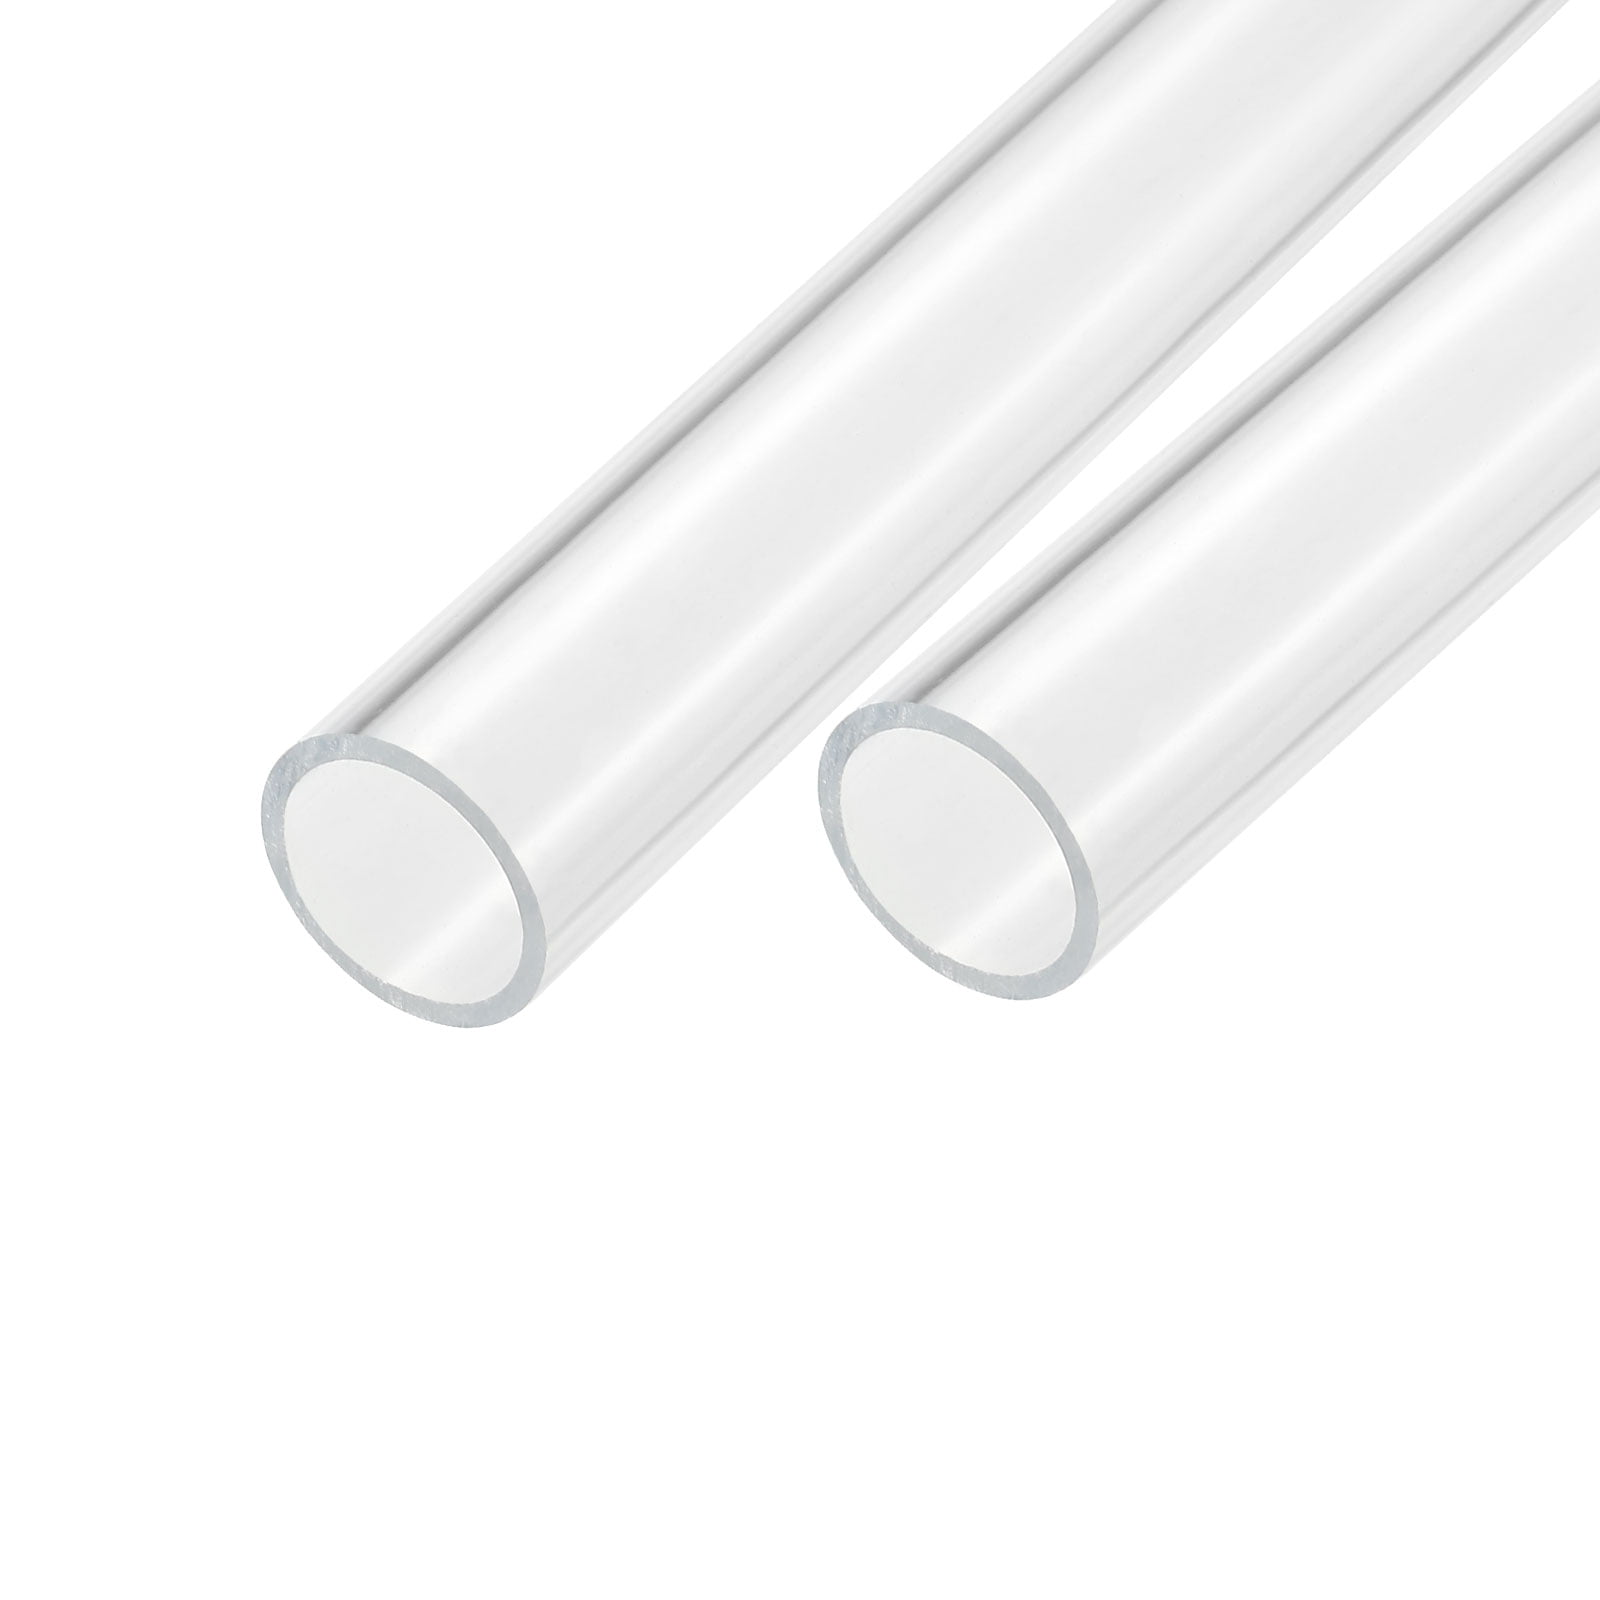 CLEAR ACRYLIC TUBE 4",6" & 8 INCH LONG LENGTHS 5MM TO 24MM DIAMETER PERSPEX PIPE 